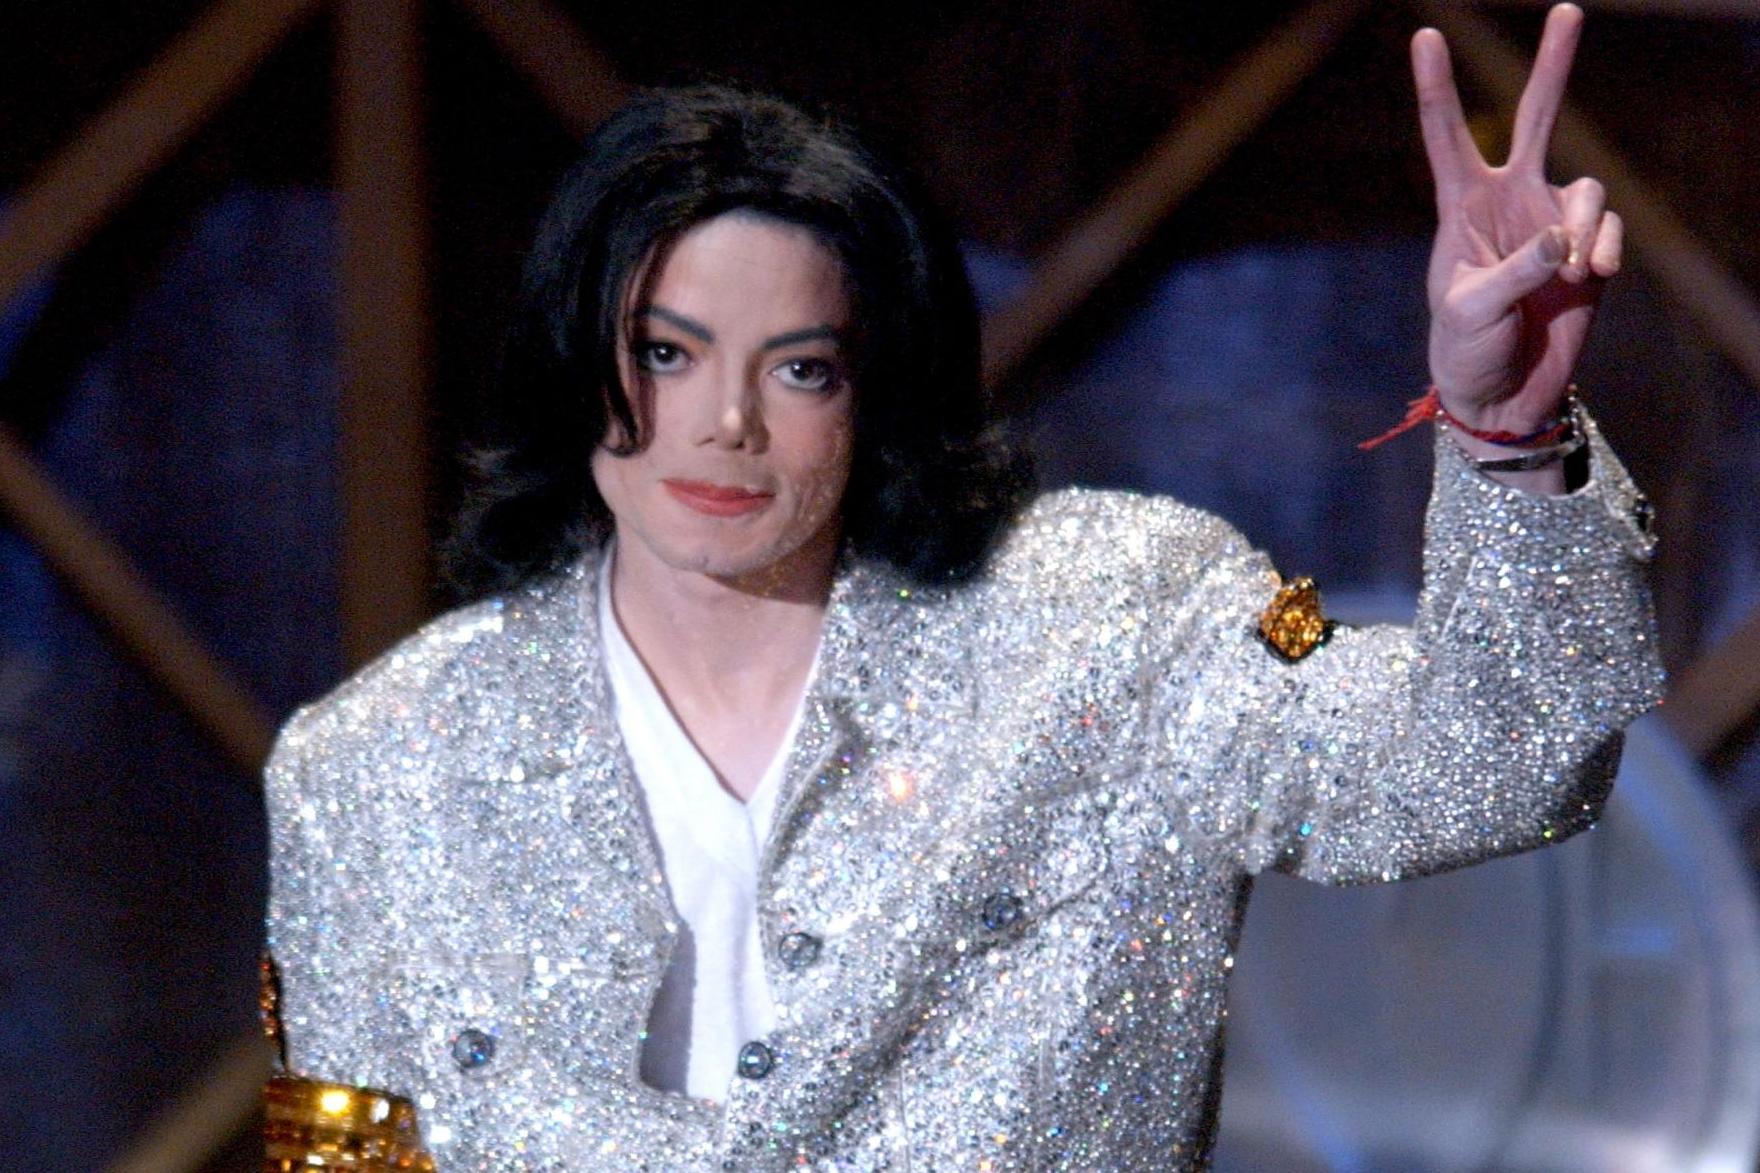 Michael Jackson accepts his Performer of the Century Award during the 29th Annual American Music Awards at the Shrine Auditorium on 9 January, 2002 in Los Angeles, California.